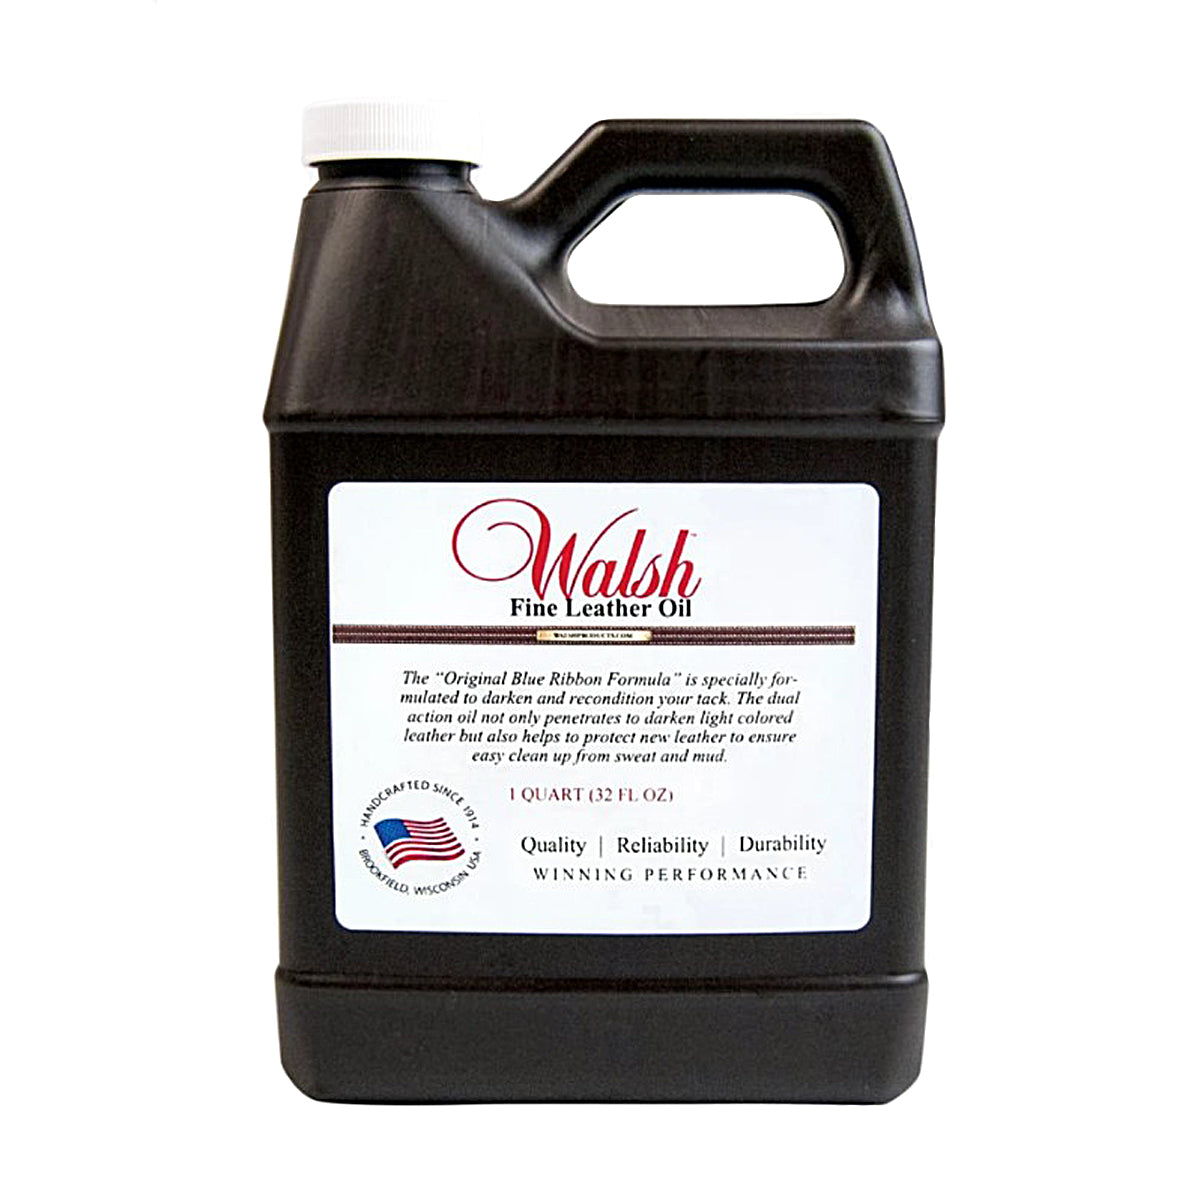 Walsh Leather Oil